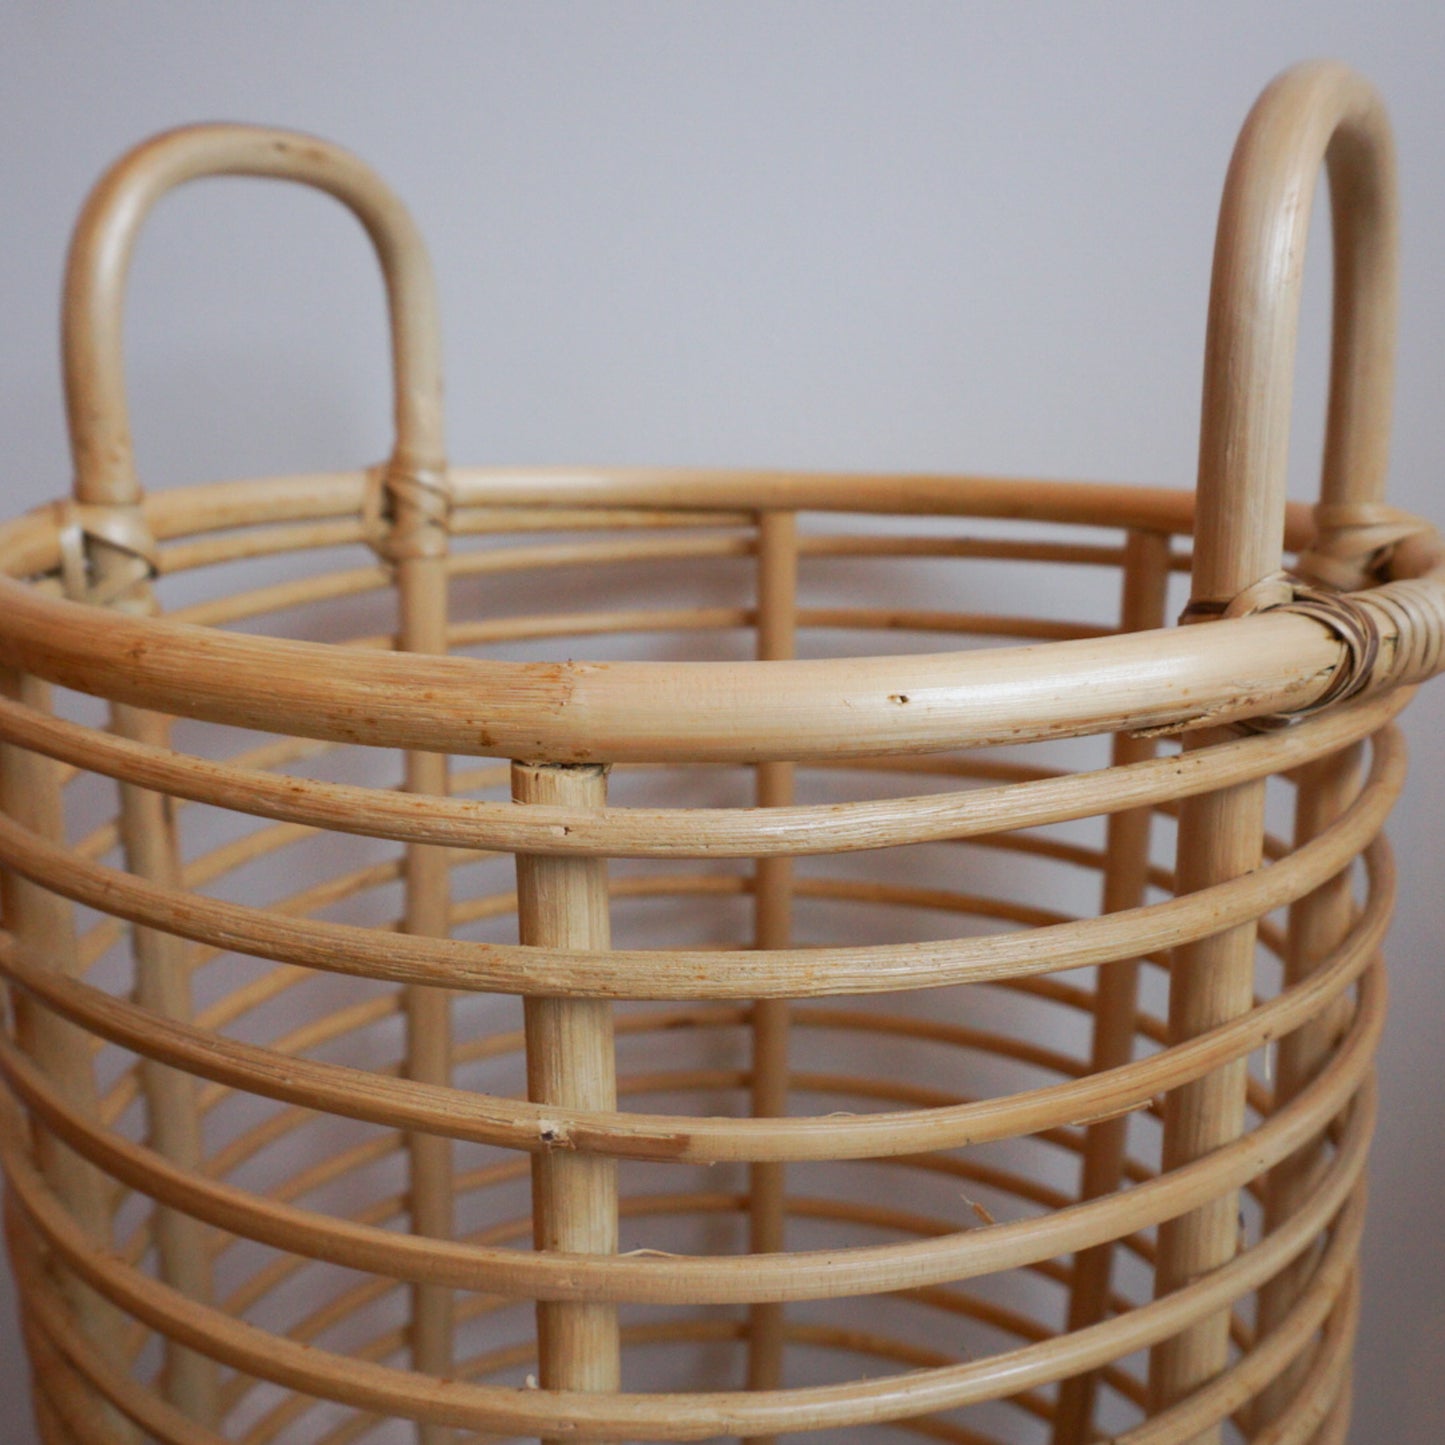 Natural and eco-friendly rattan basket for home organization